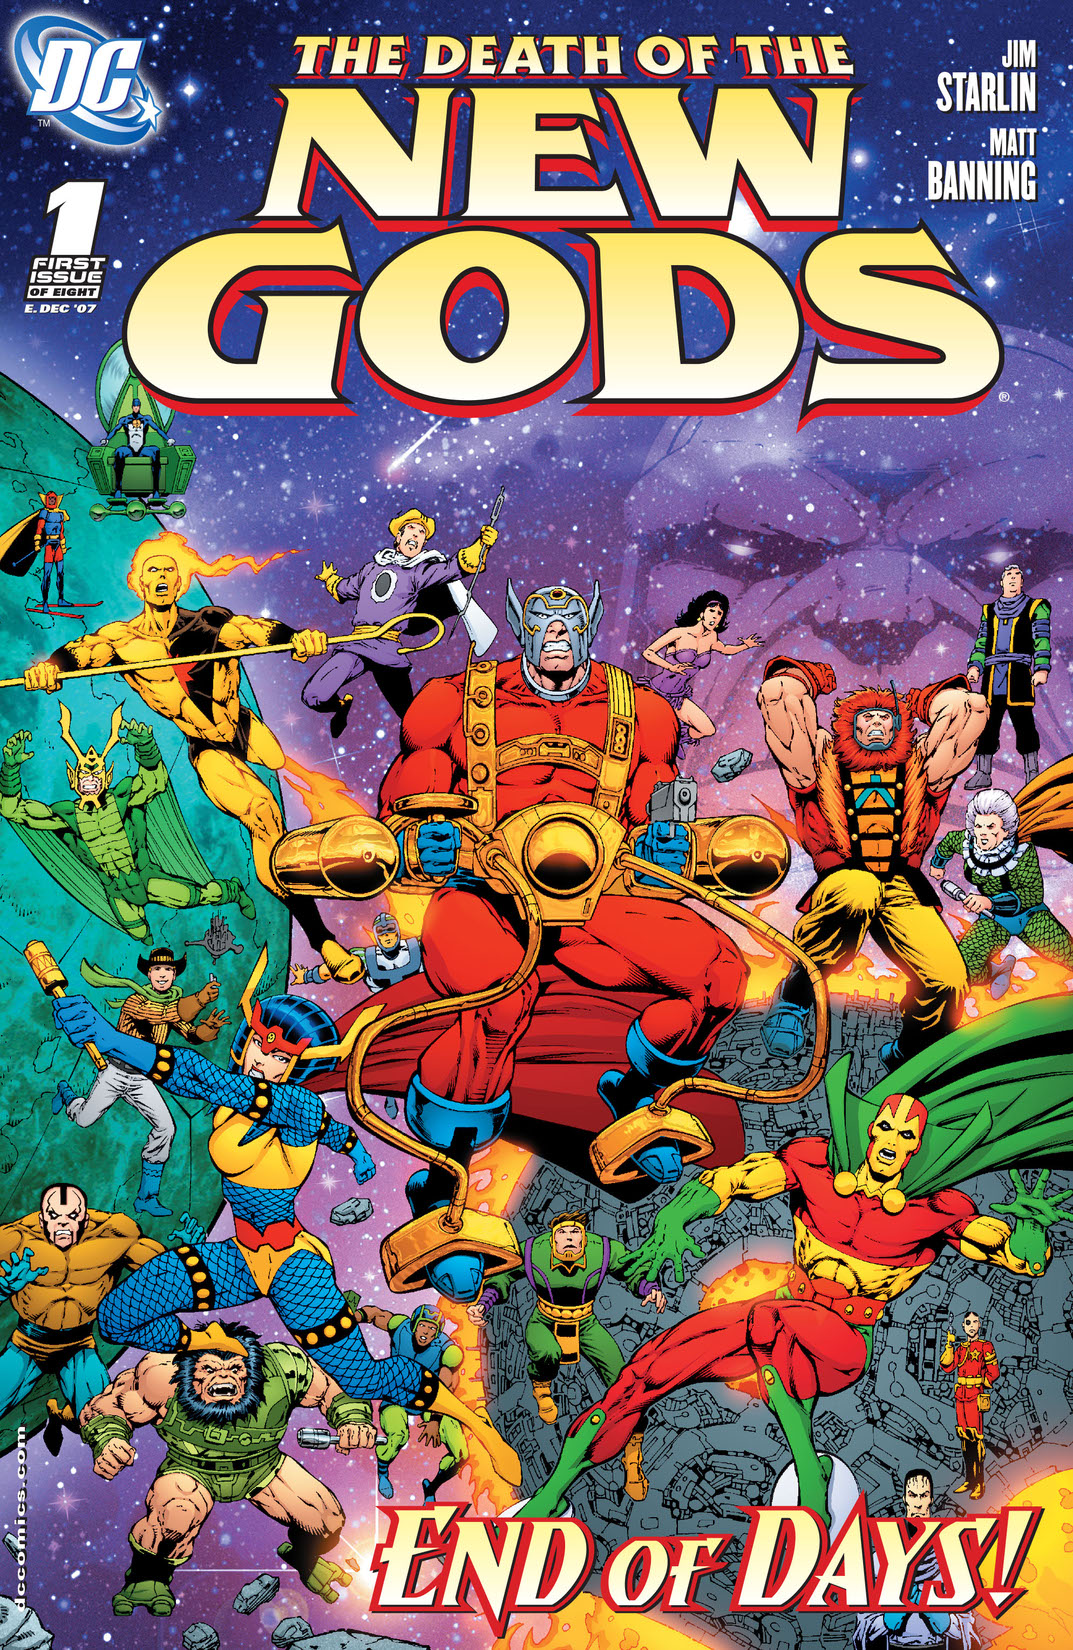 Death of the New Gods #1 preview images